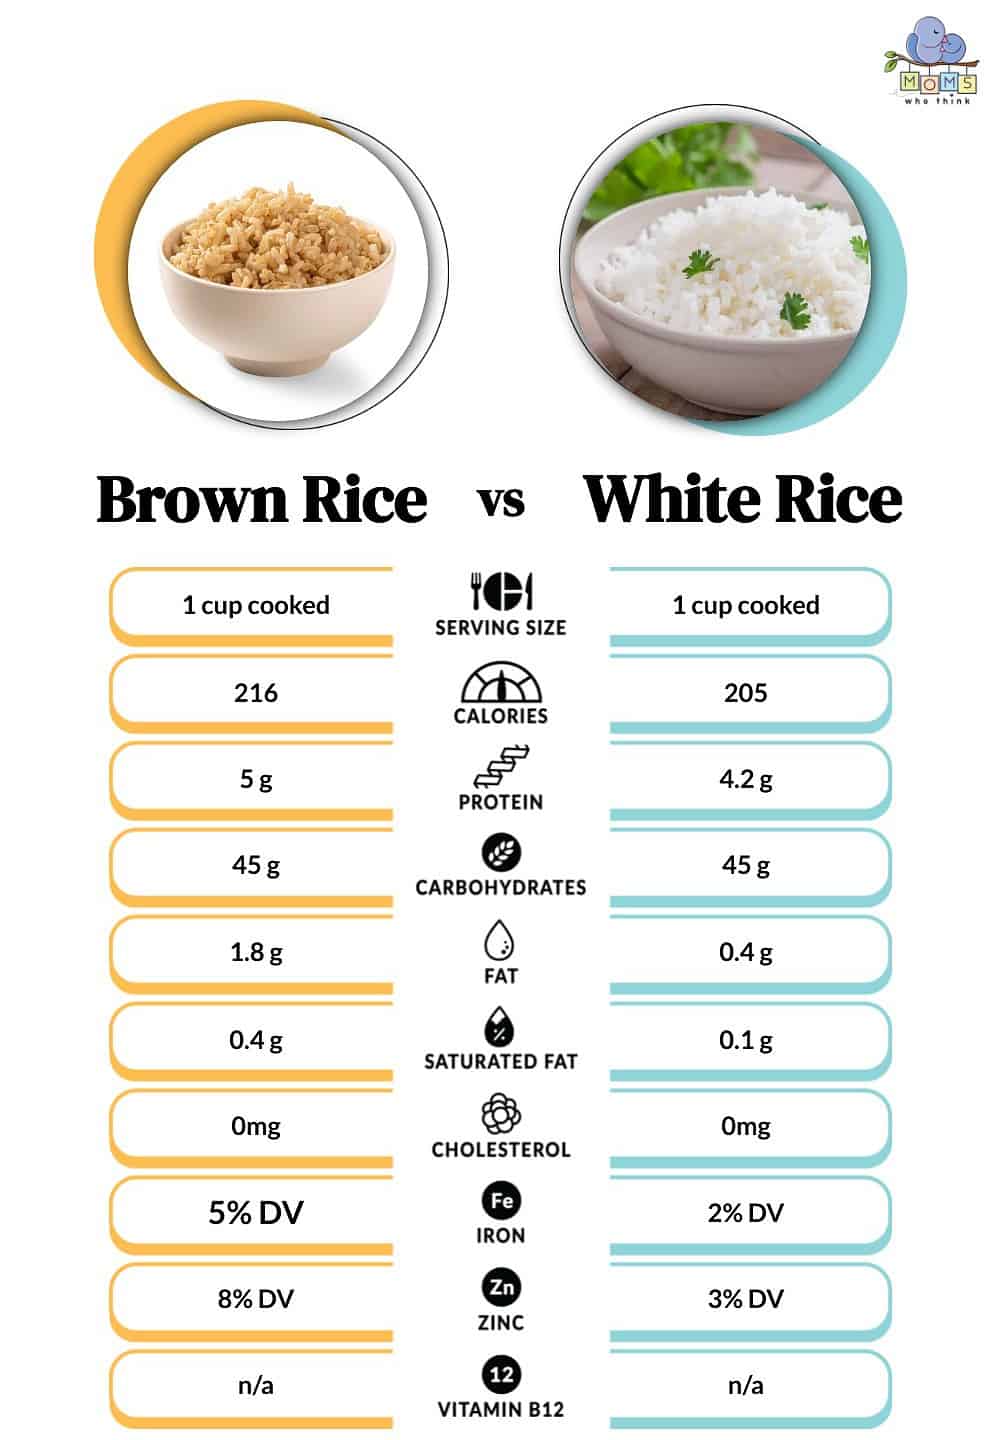 Brown Rice vs White Rice Nutritional Facts